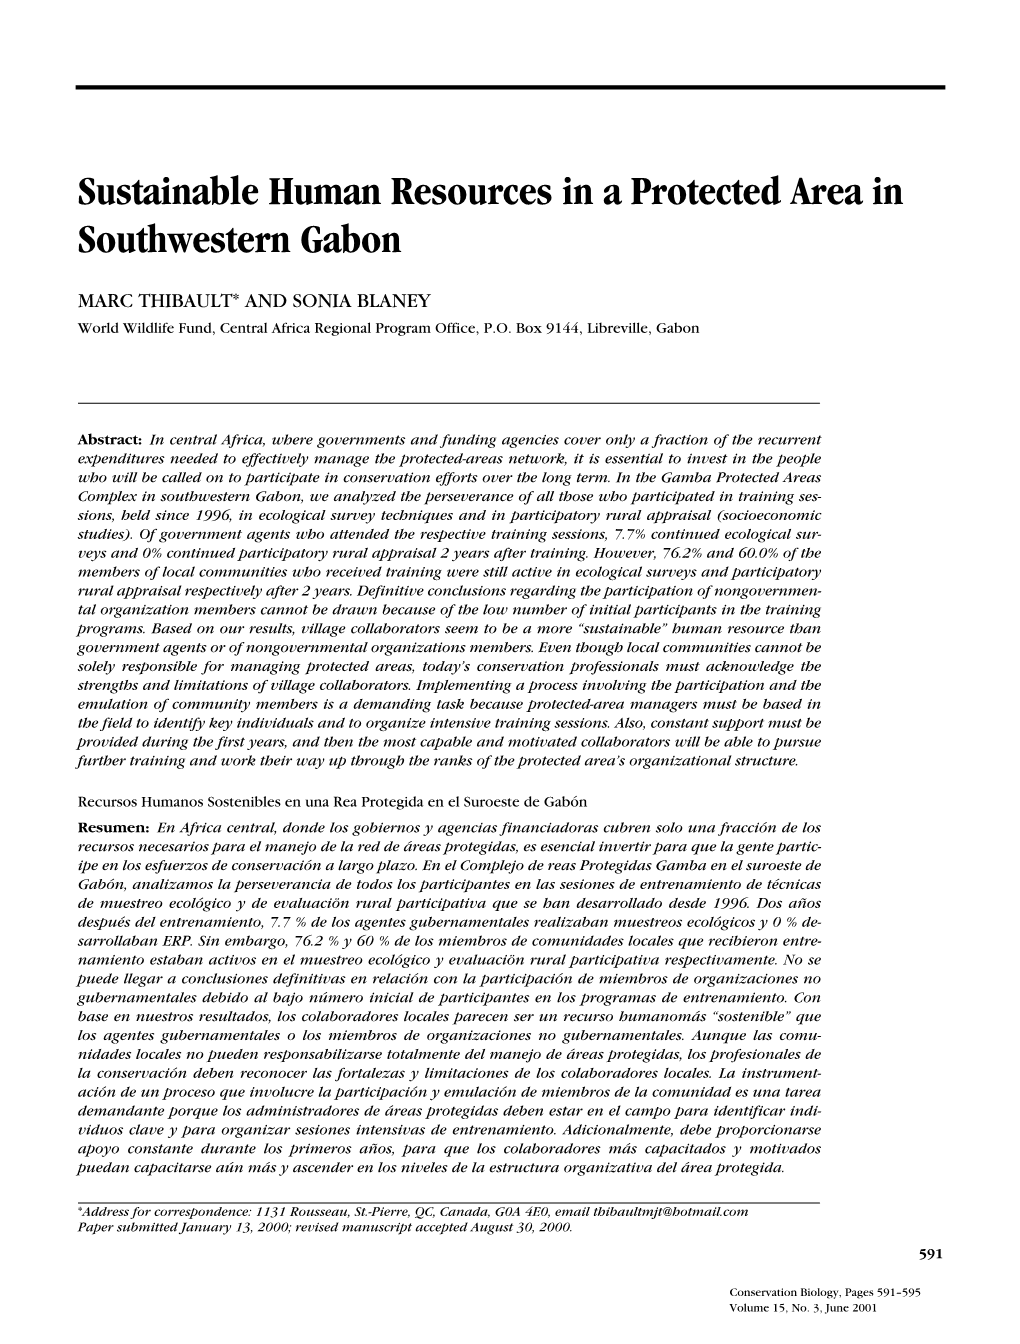 Sustainable Human Resources in a Protected Area in Southwestern Gabon